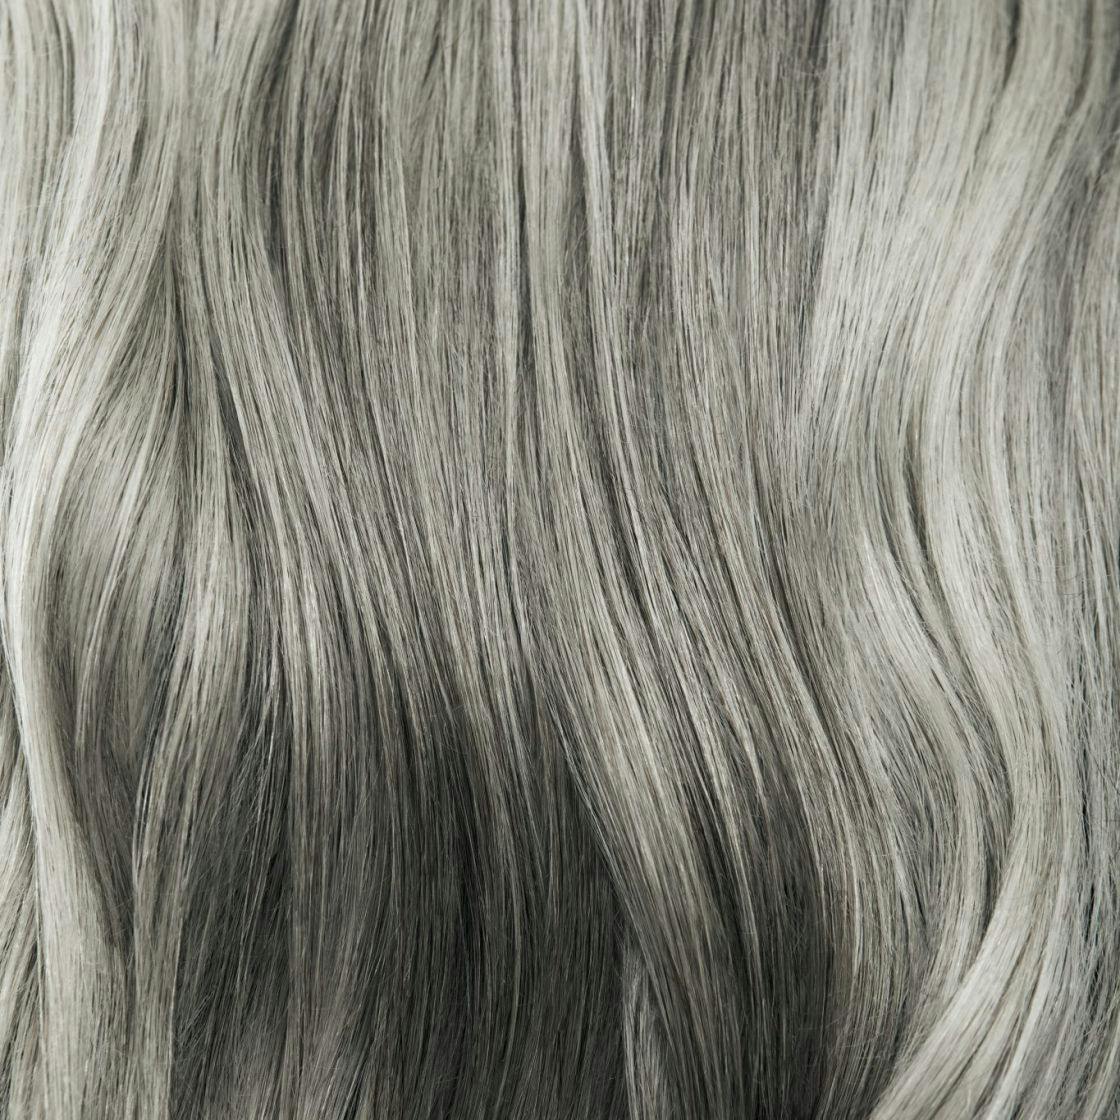 Grey hair: what happens when you go grey at a young age